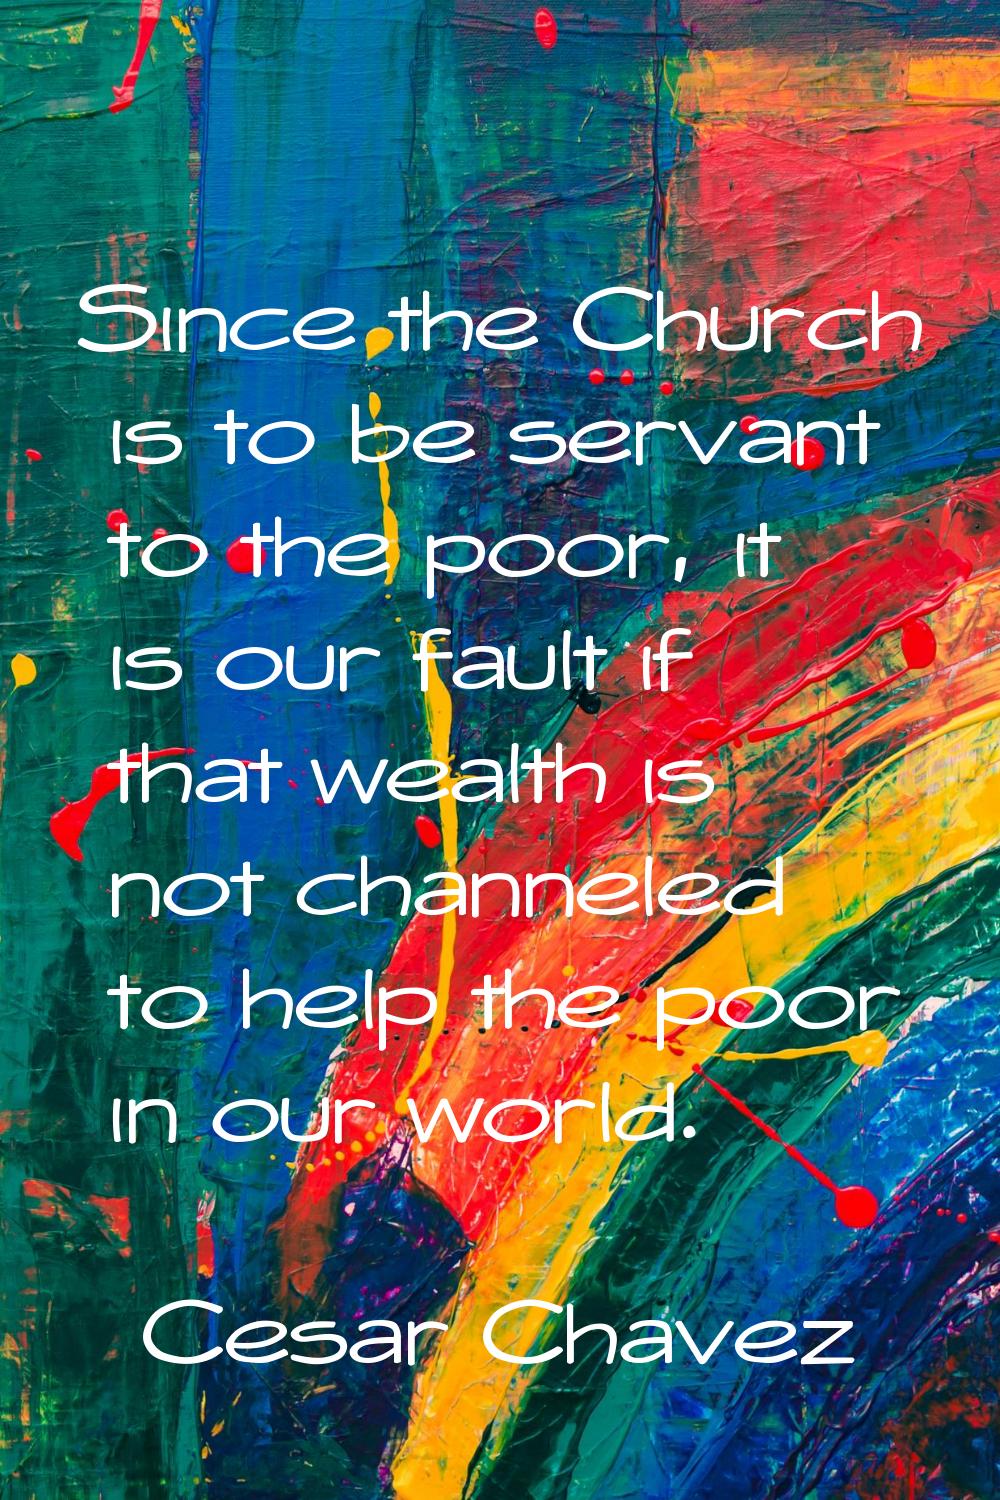 Since the Church is to be servant to the poor, it is our fault if that wealth is not channeled to h